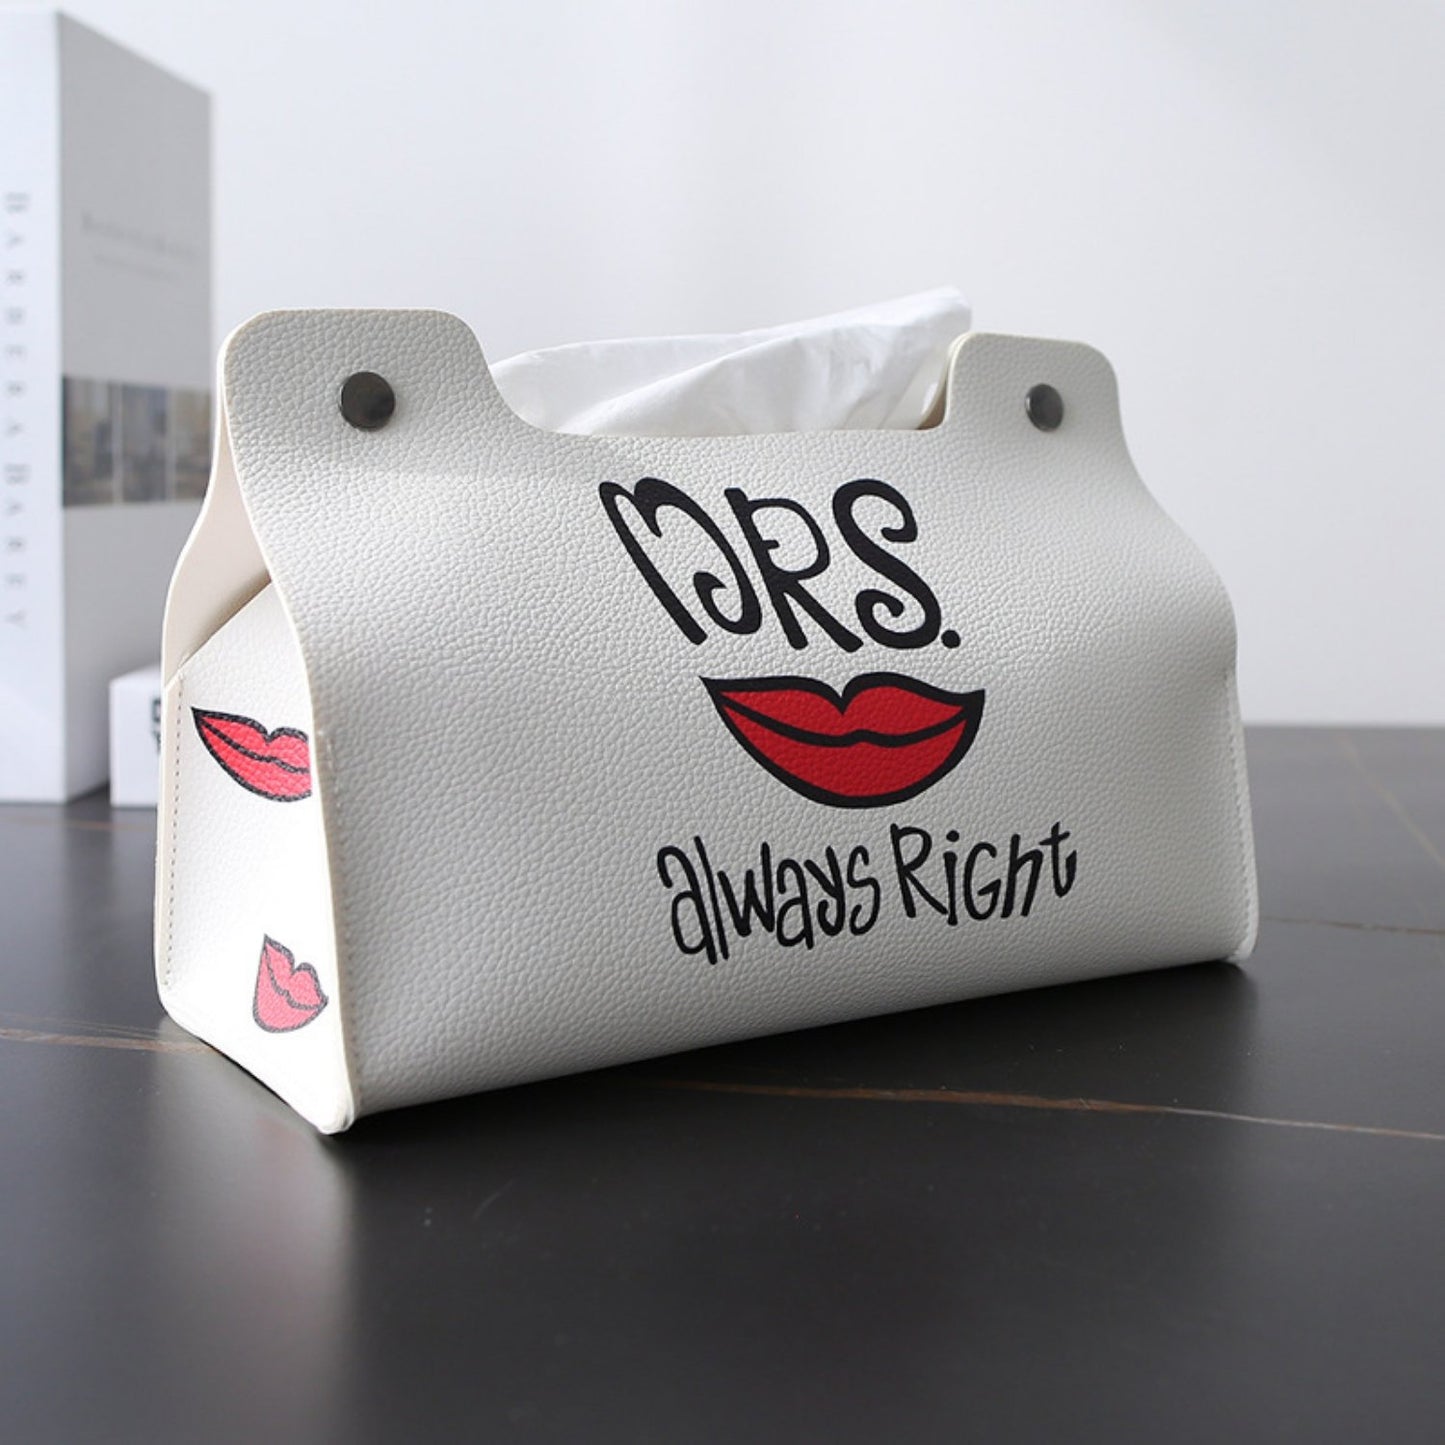 MR. & MRS. Right Tissue Boxes - BloomBliss.com